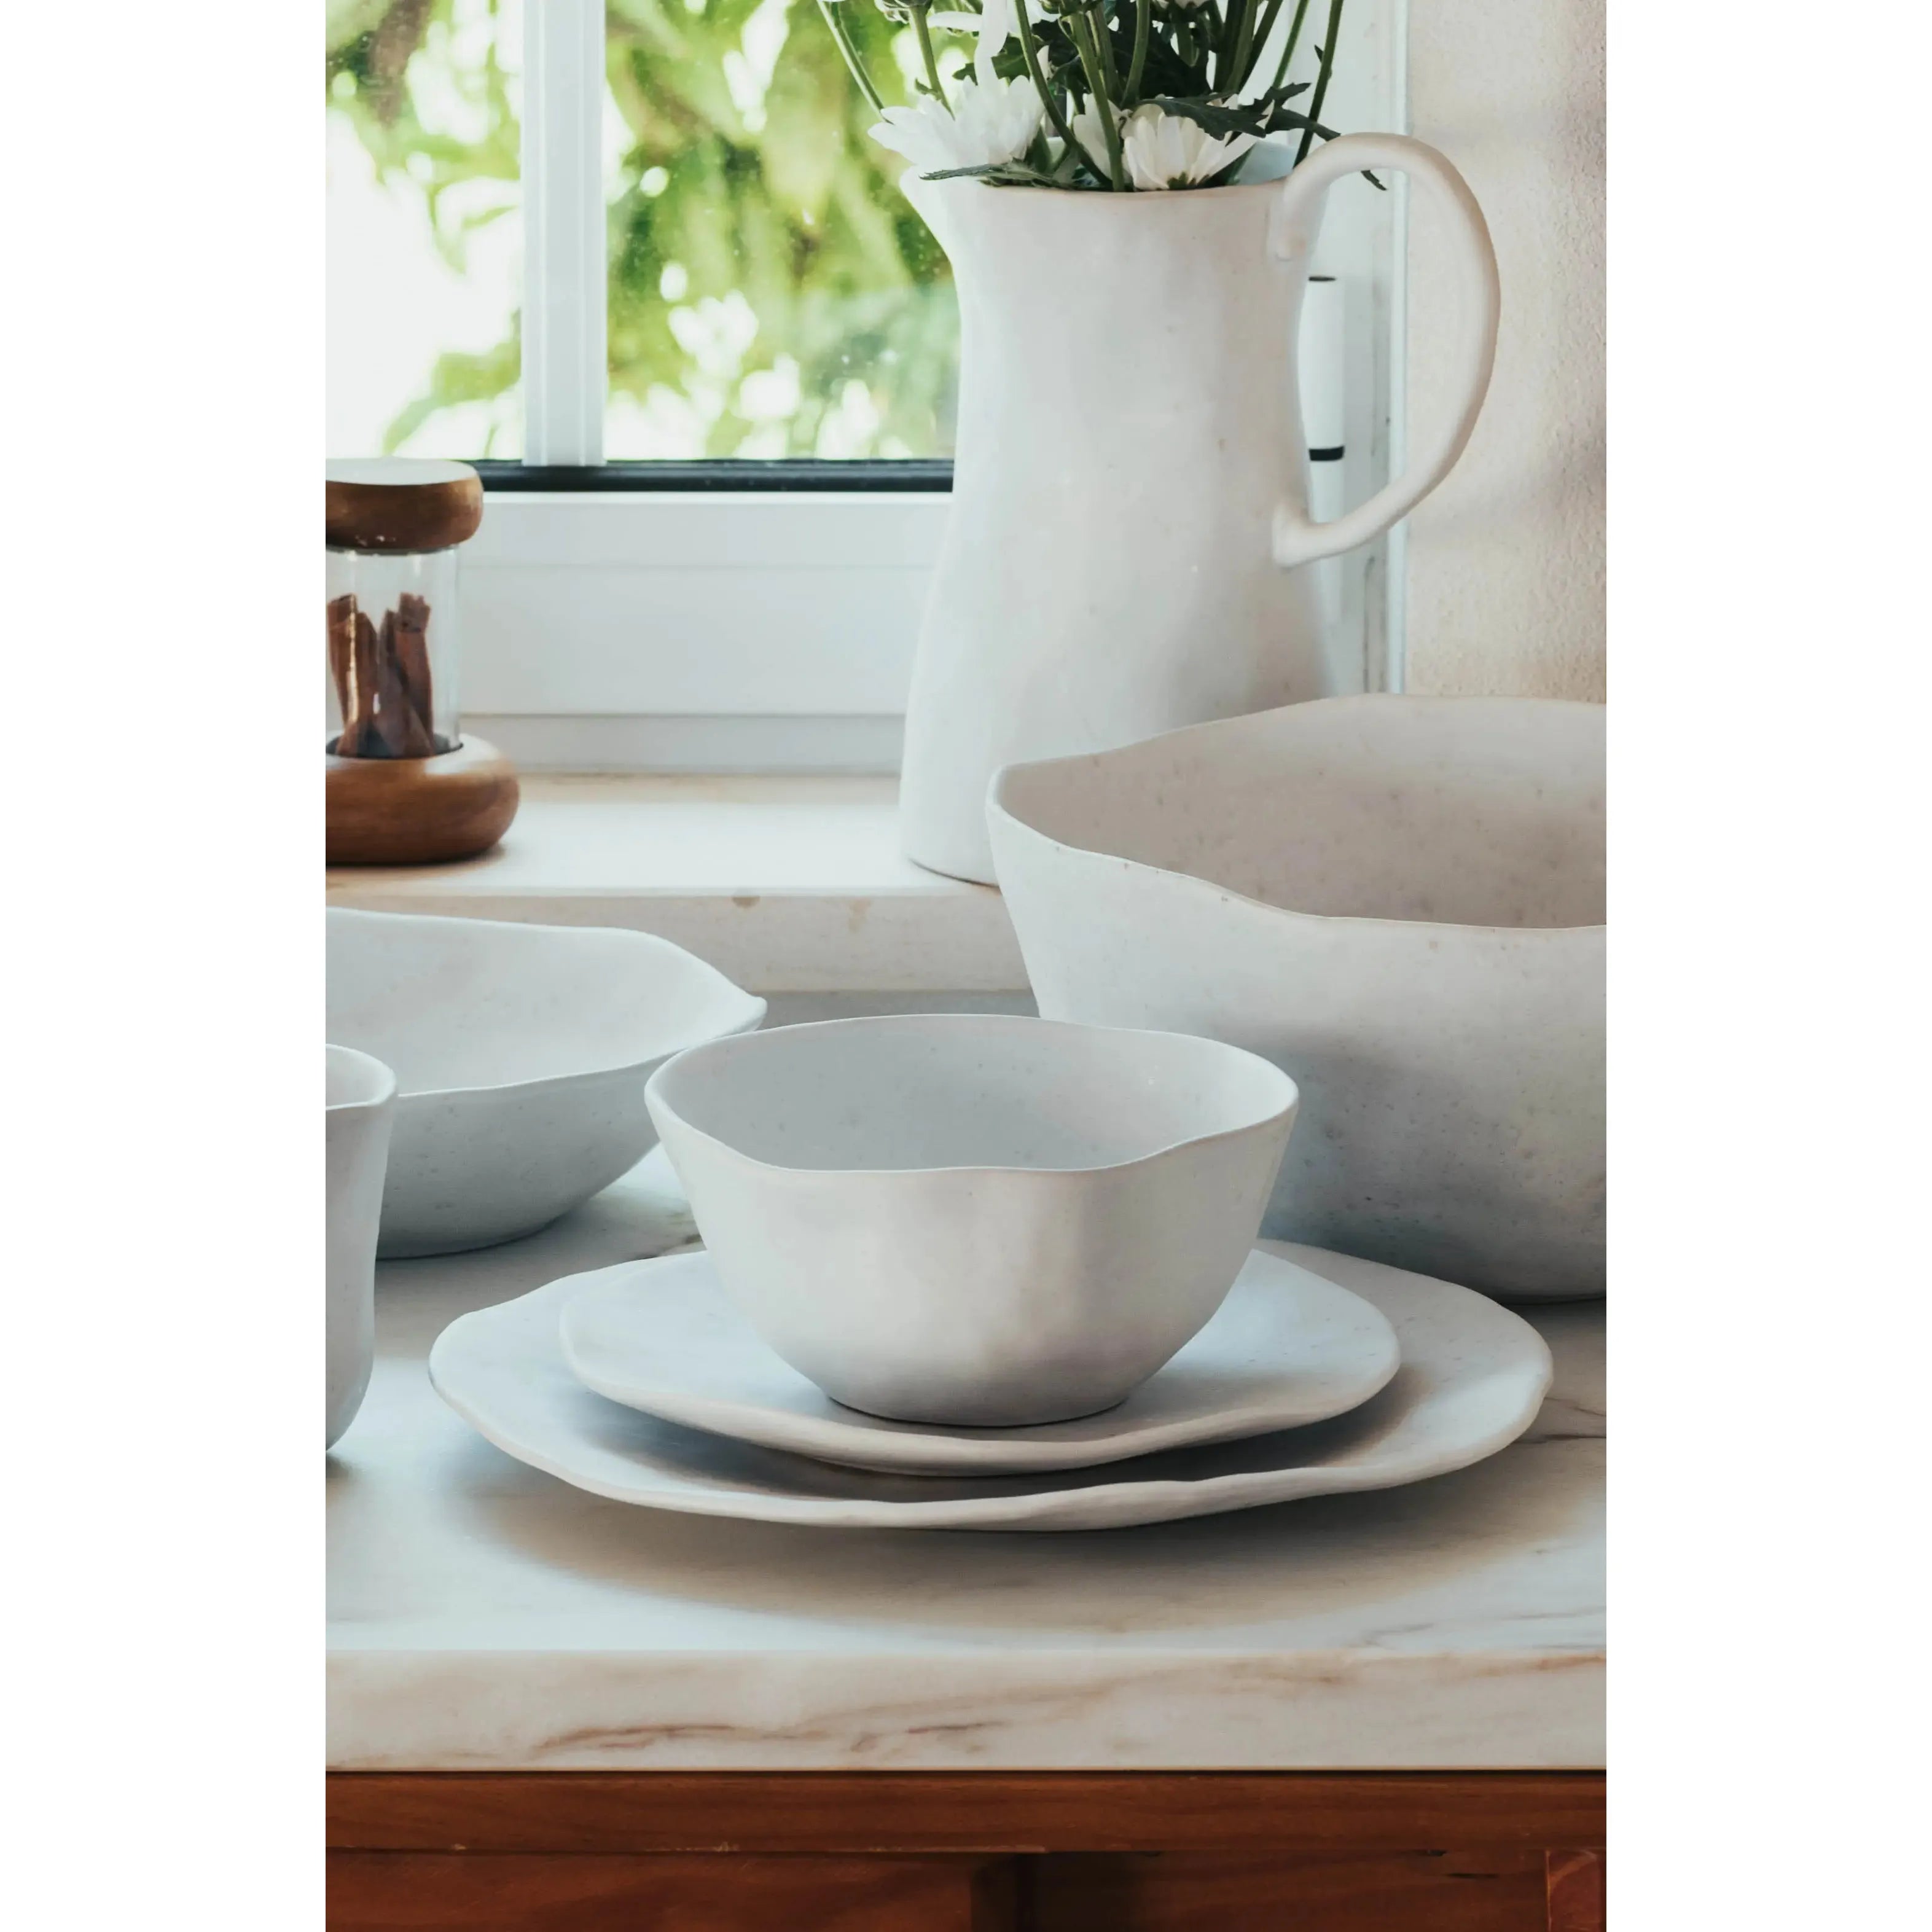 This matte glaze bowl is a beautiful dinner table item! With an elegant white color, is also perfect for use as decorative piece. And for a very special set, check out all of our unique "Nature Shape Smooth White" products. Amethyst Home provides interior design services, furniture, rugs, and lighting in the Kansas City metro area.